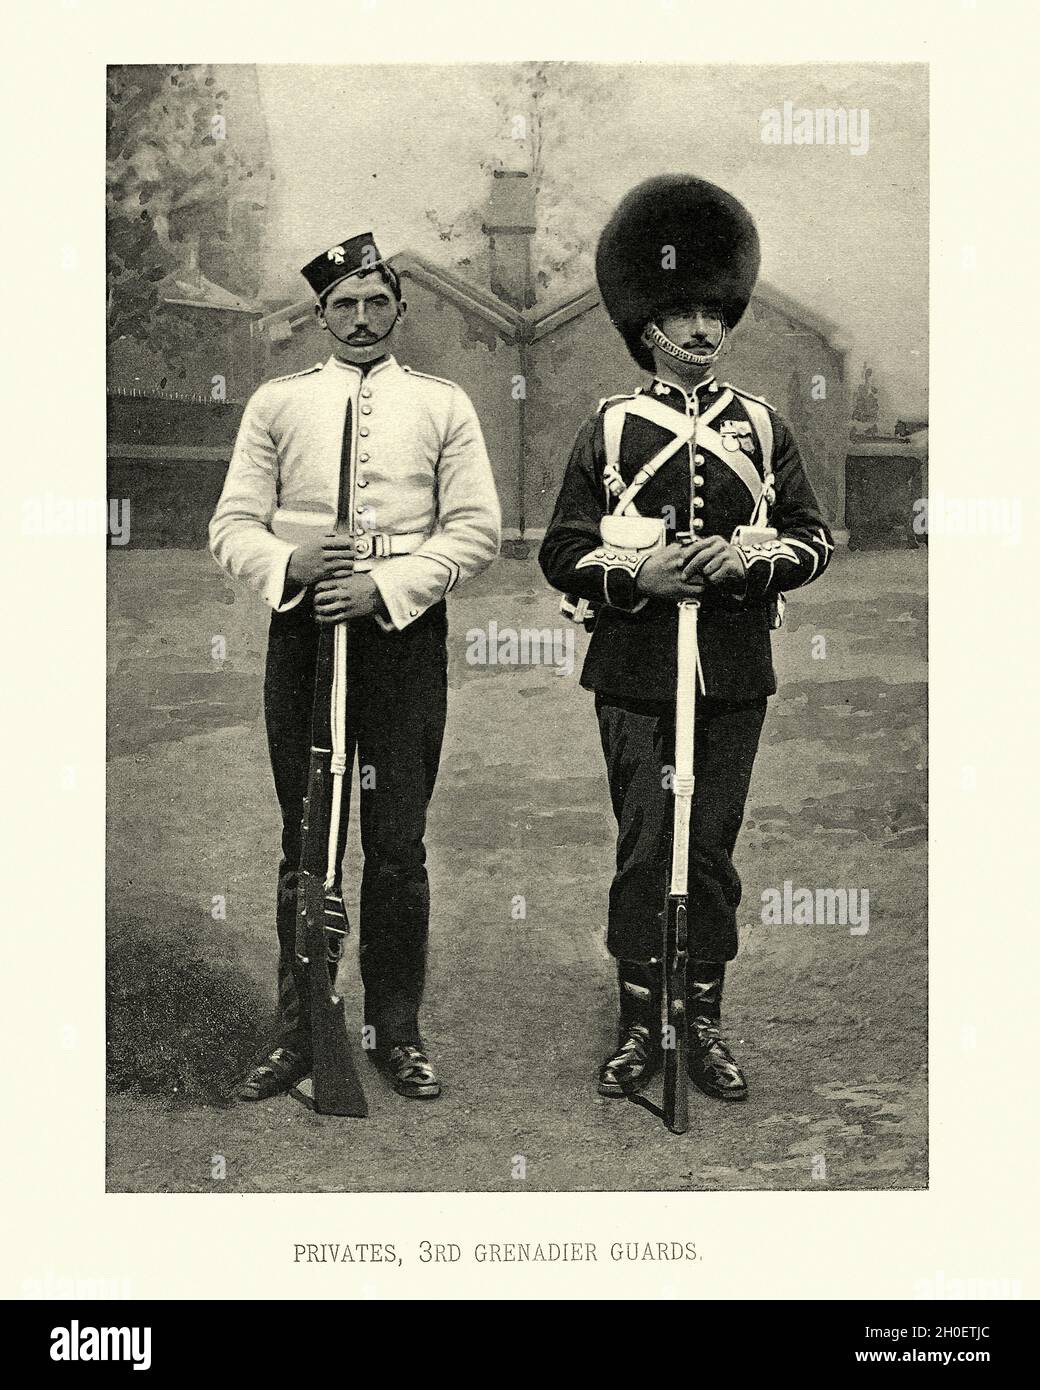 Vintage photogrtaph of British Army soldiers, Privates 3rd Grenadier Guards, Military uniform, Victorian 19th Century Stock Photo